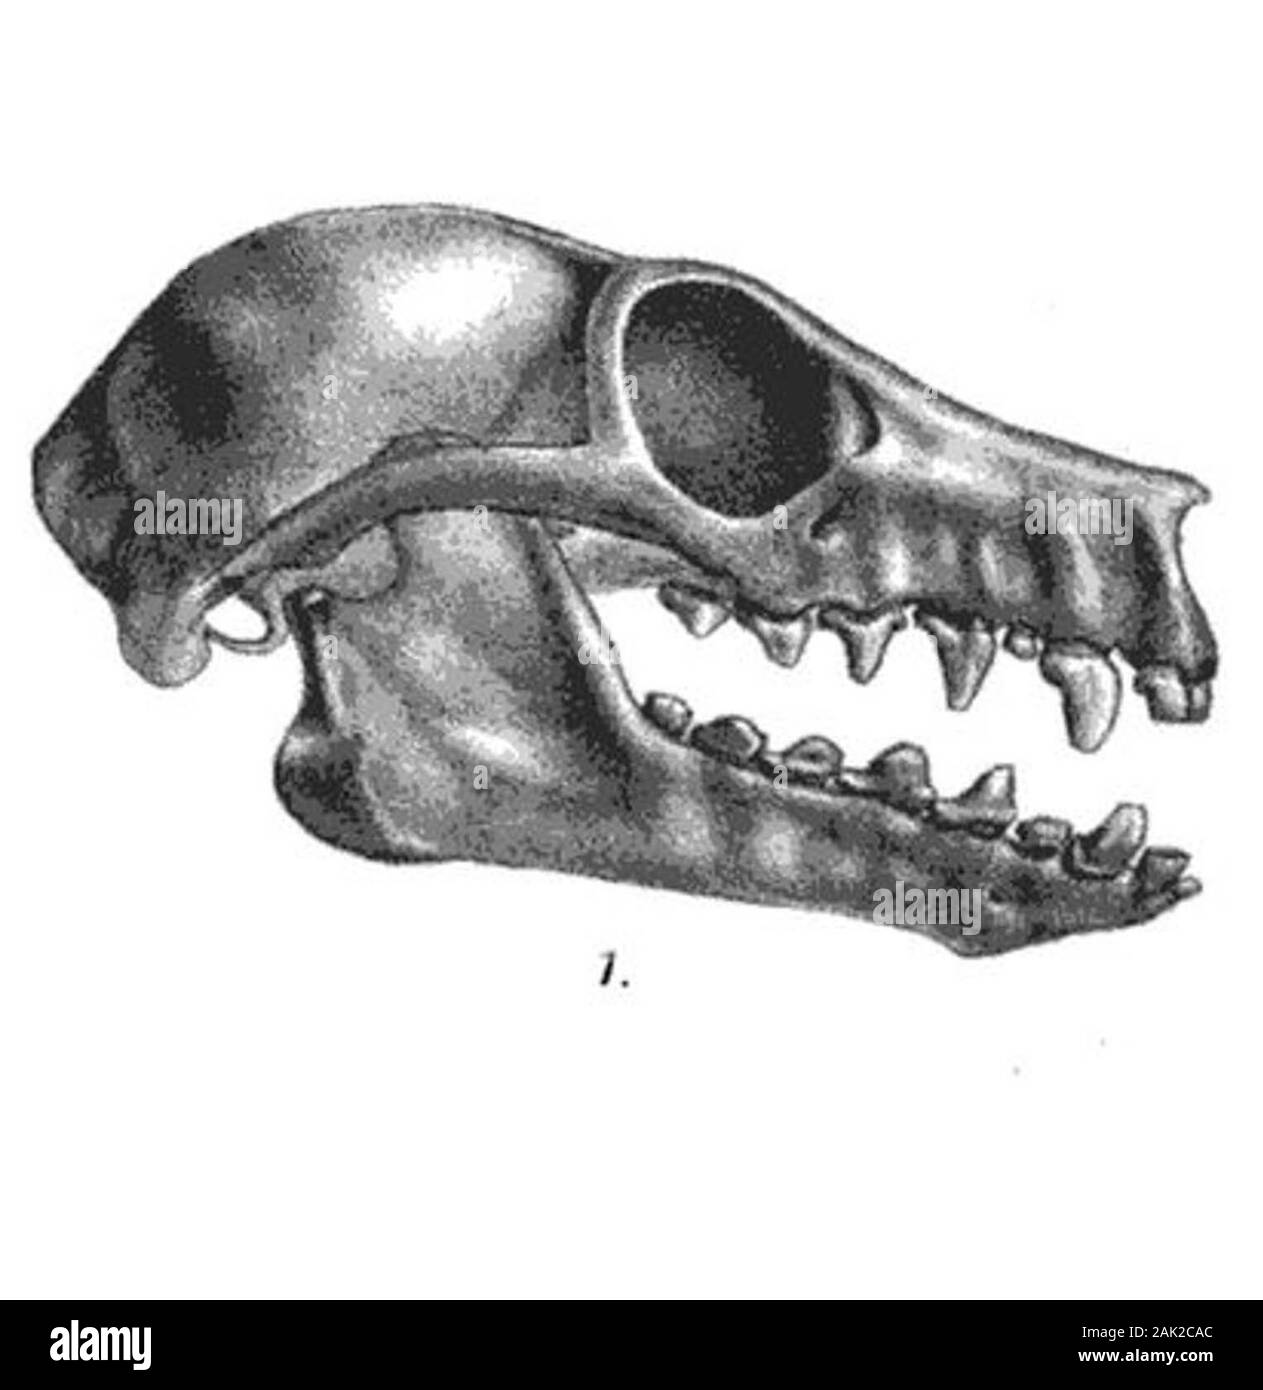 Illustration of the skull of the white-winged flying fox, Stock Photo